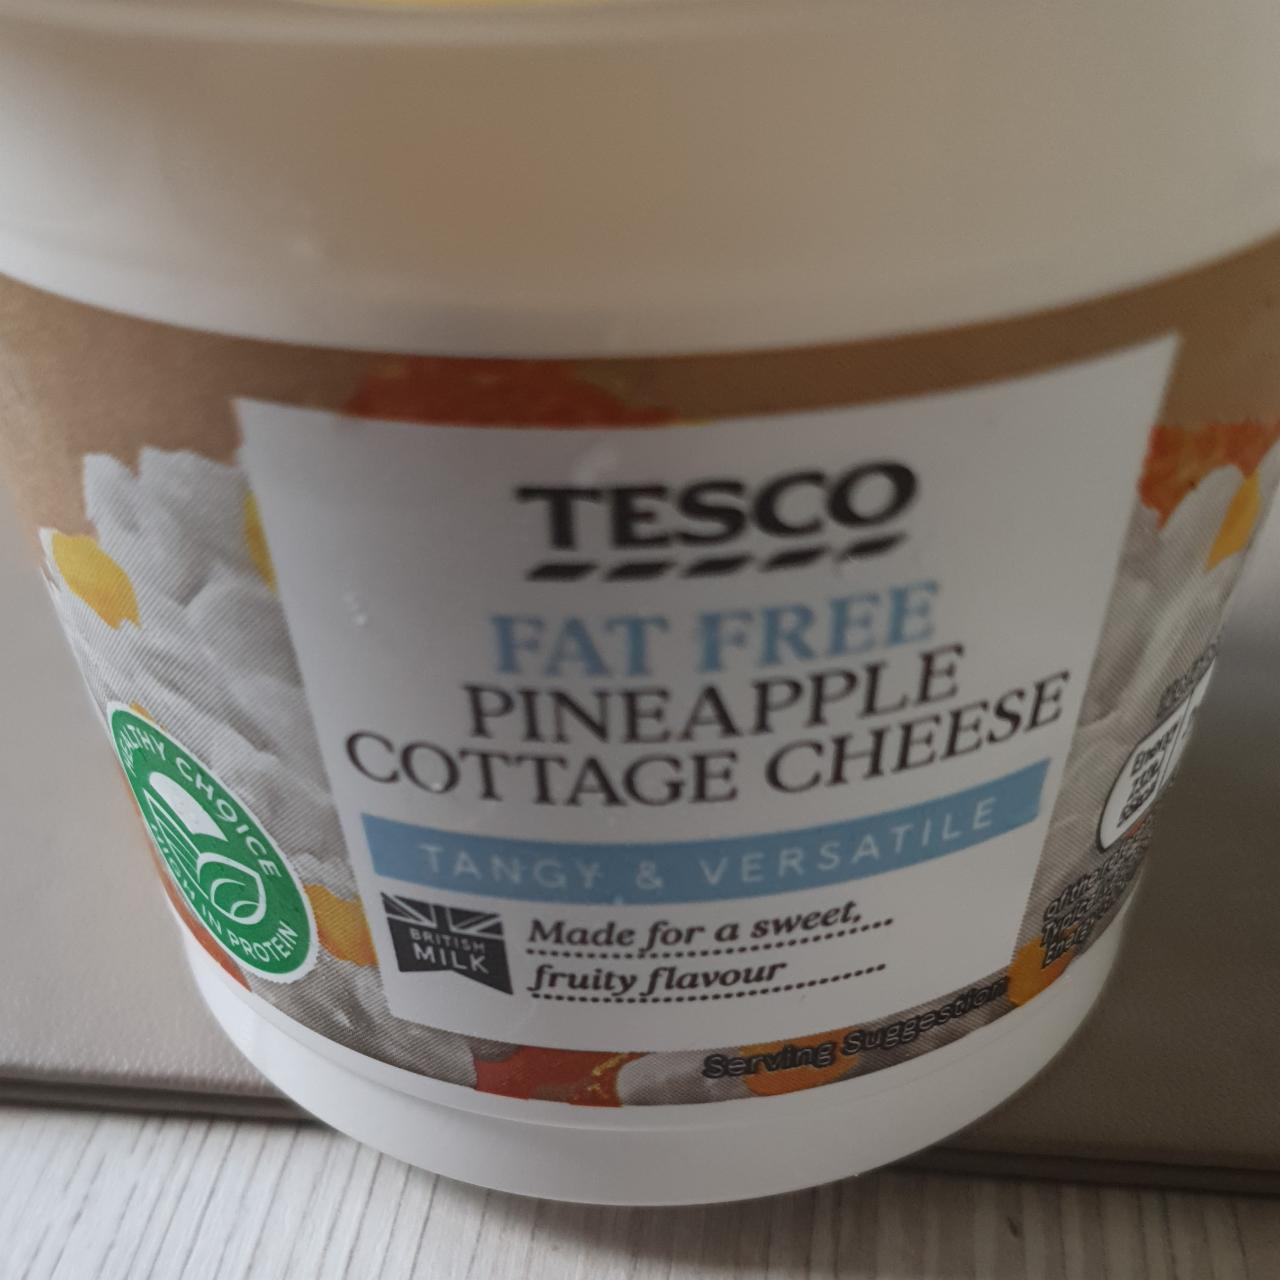 Fotografie - Fat free Pineapple Cottage cheese Tesco